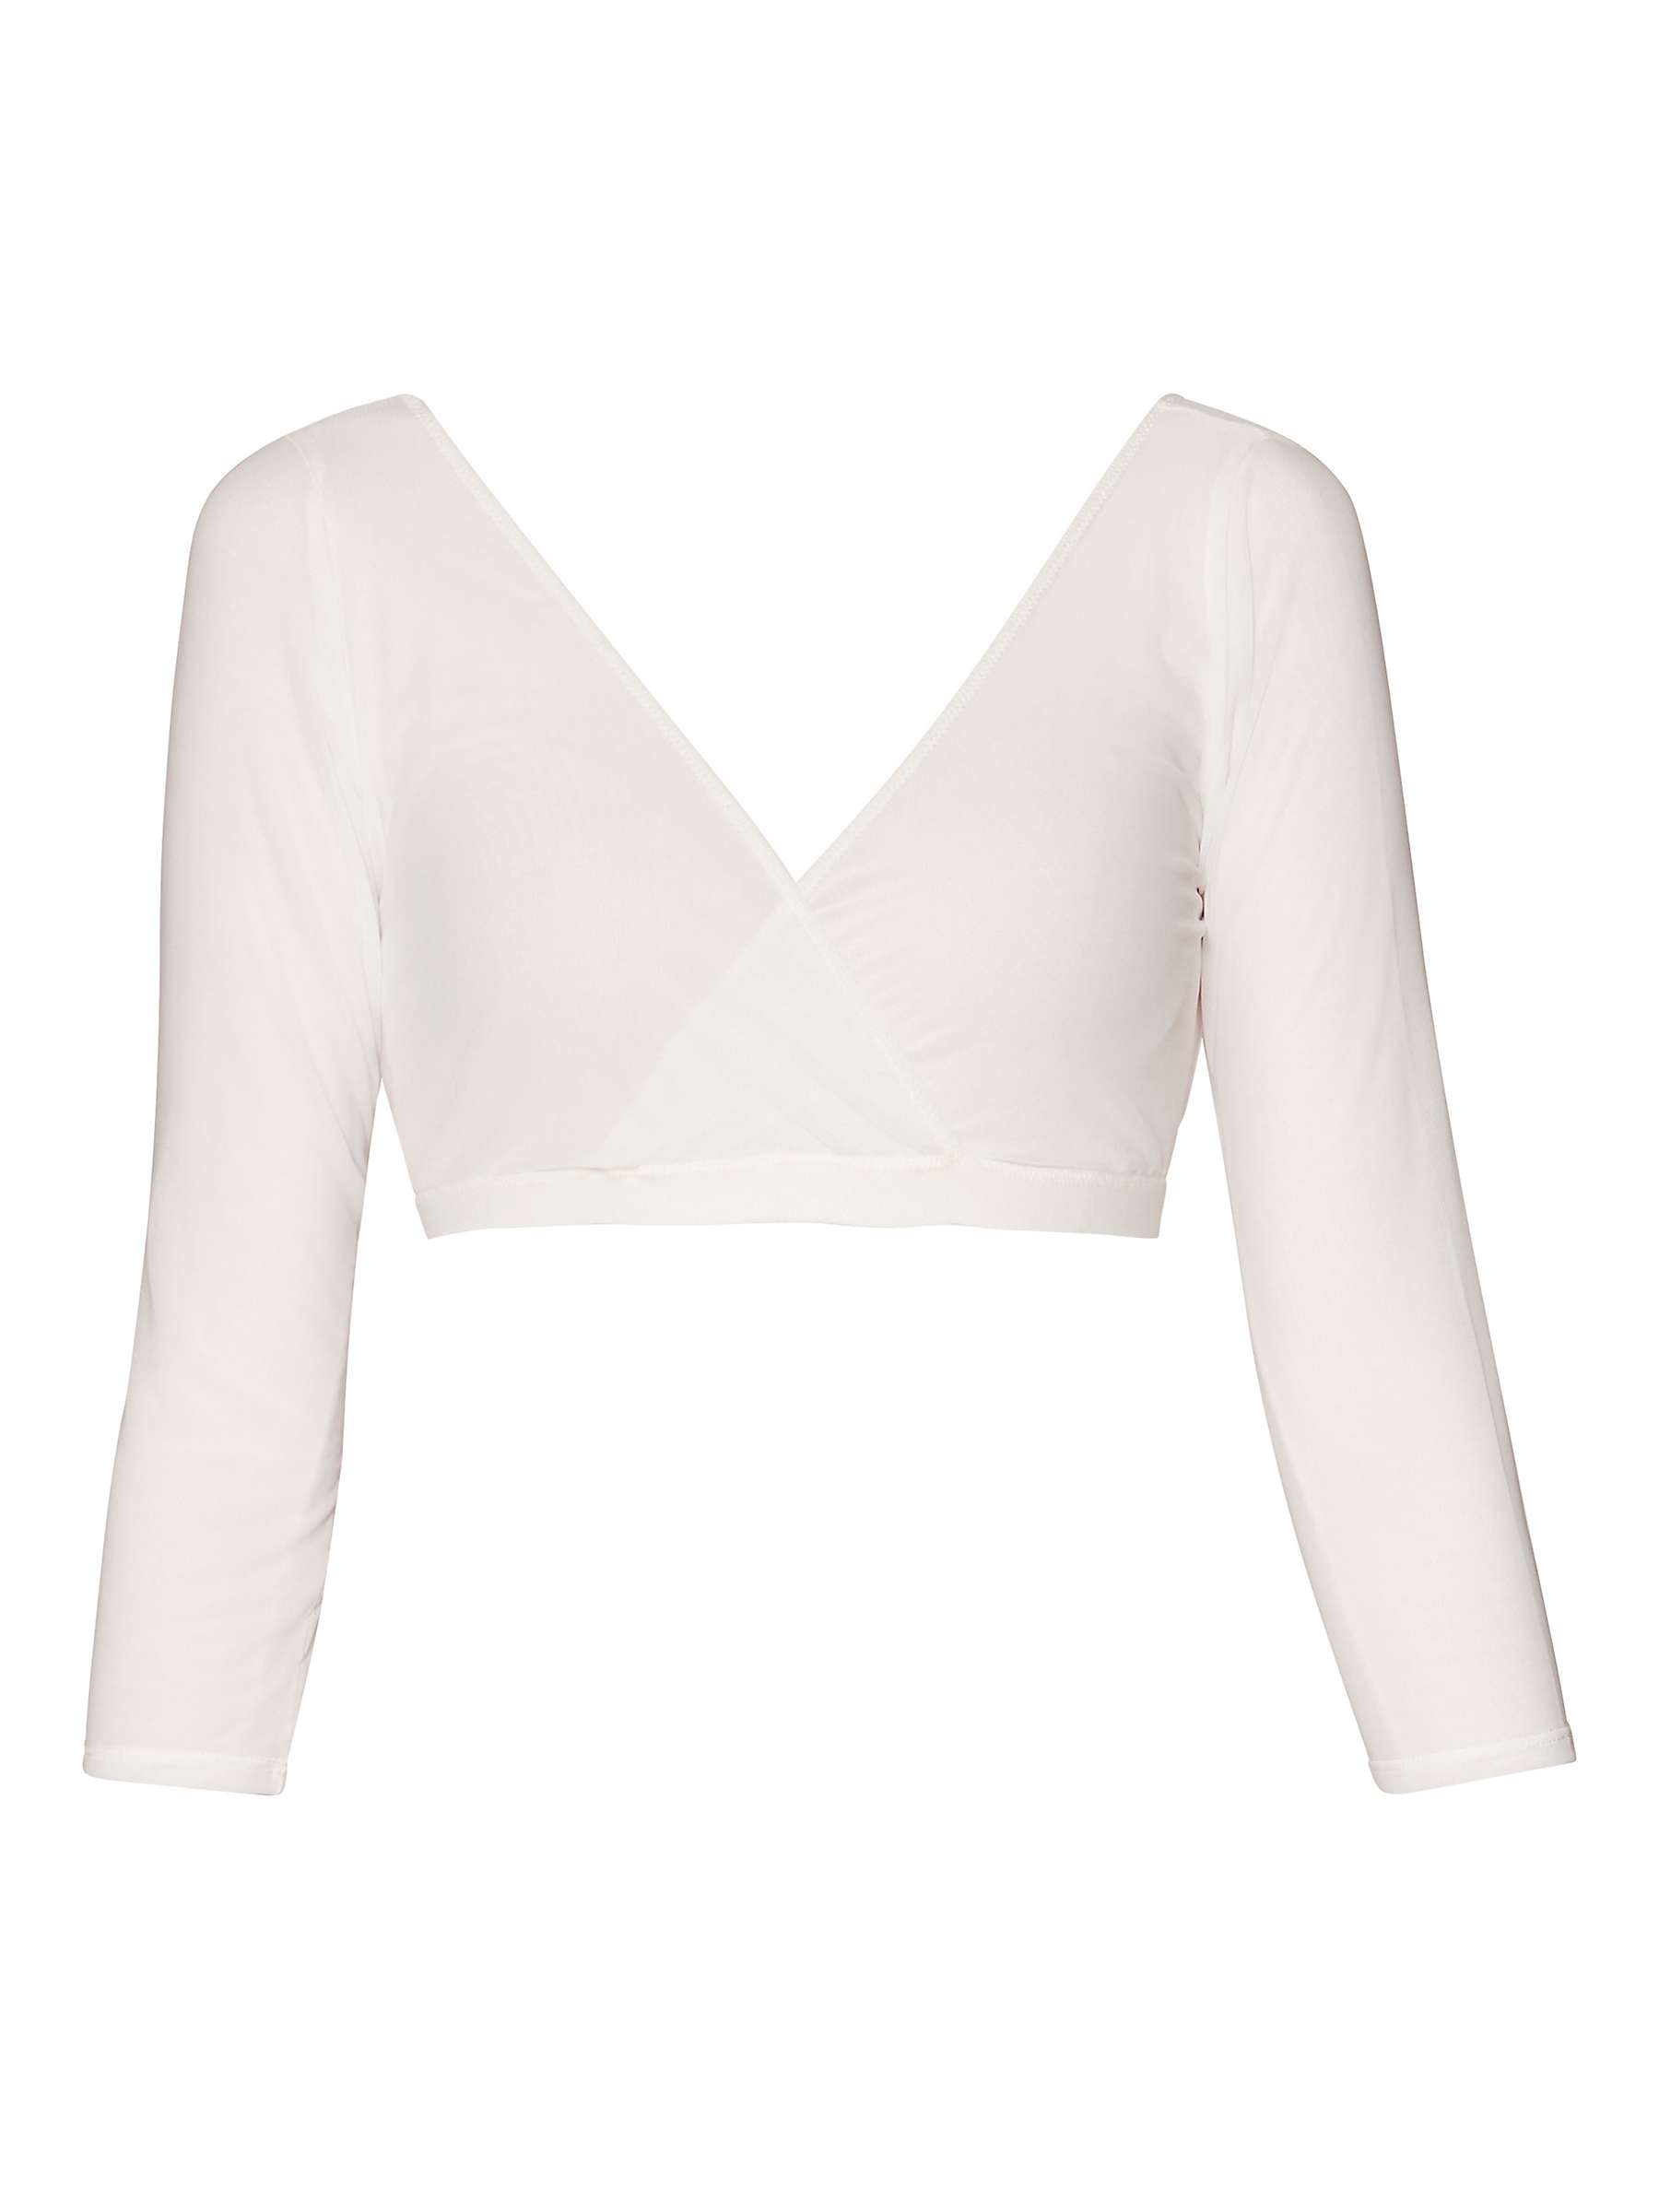 Buy Gina Bacconi Mesh Long Sleeve Under Top Online at johnlewis.com